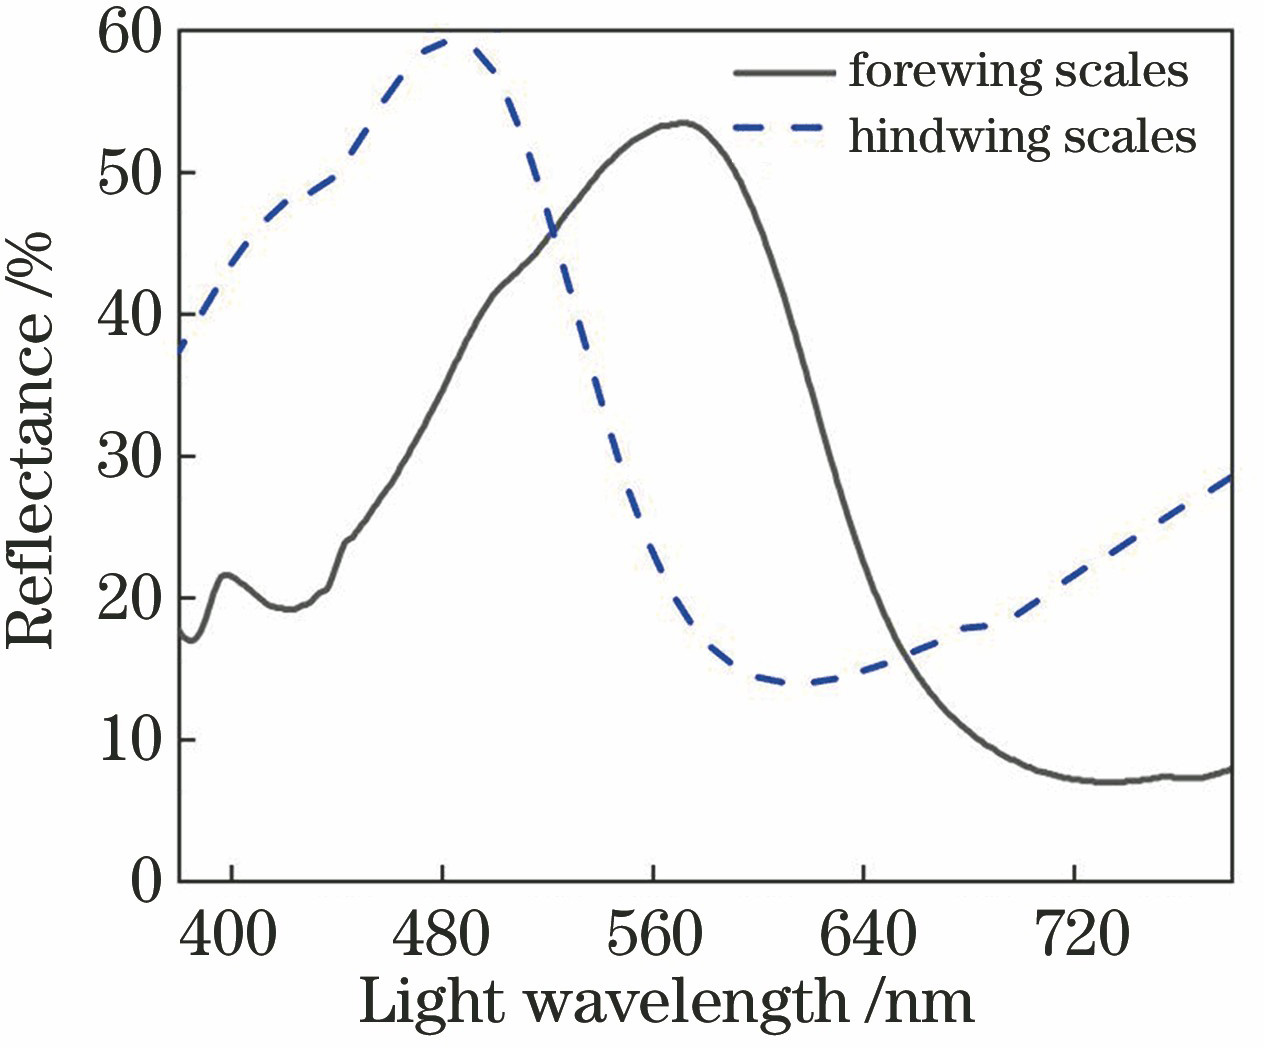 Reflectance spectrum characteristics of the scales with structural color